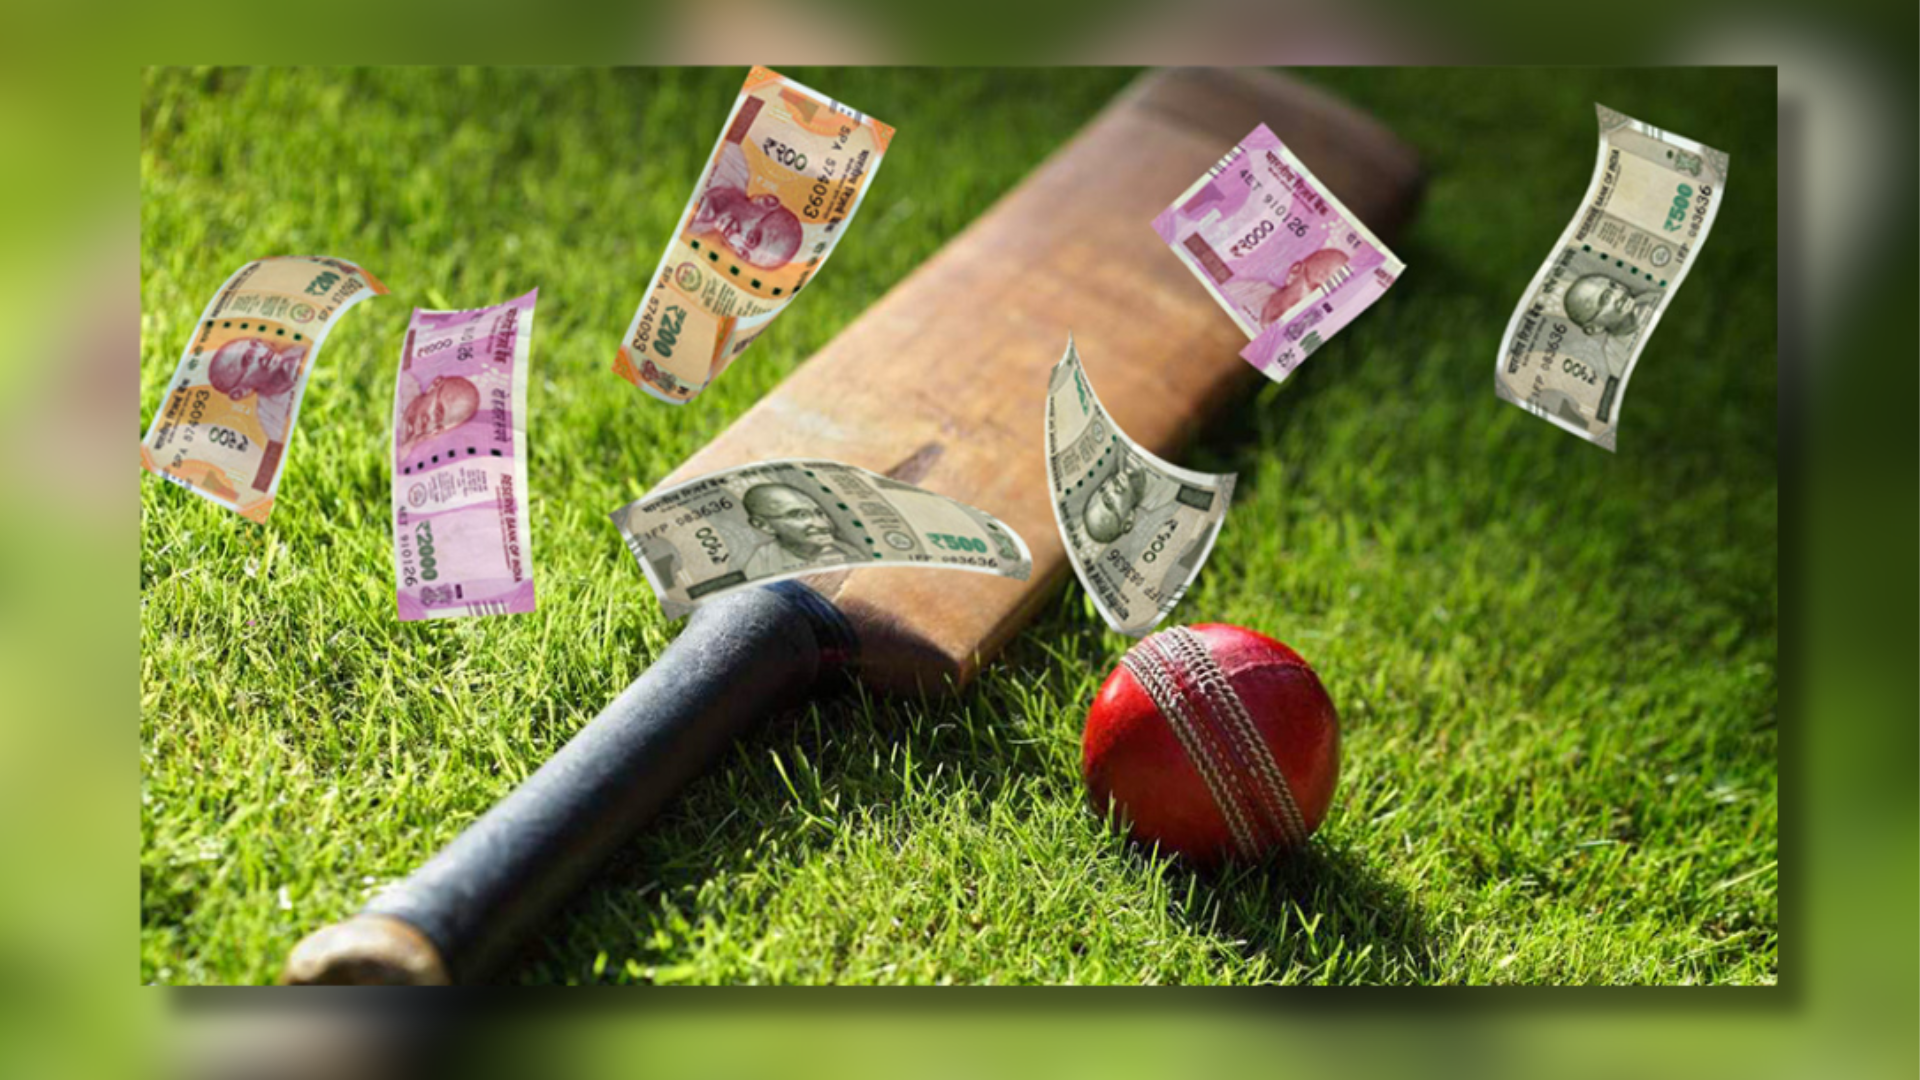 Three Individuals Arrested By Delhi Police For IPL Match Betting